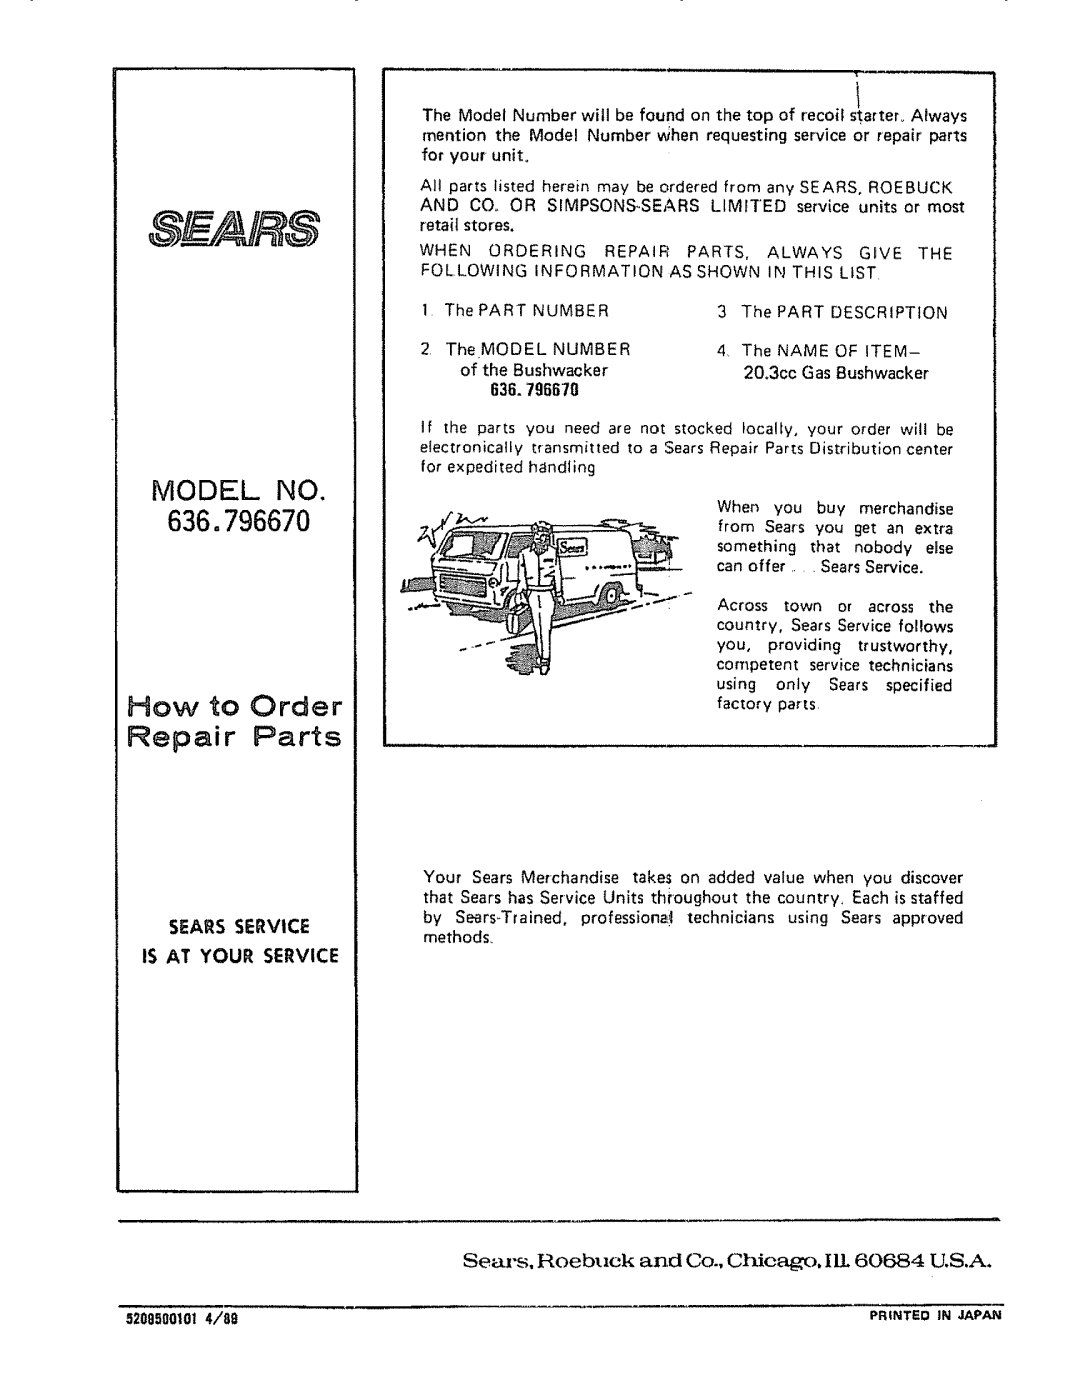 Craftsman 636.79667 manual How to Order, Sears Service Is At Your Service, TheMODEL, Model No, Repair Parts 